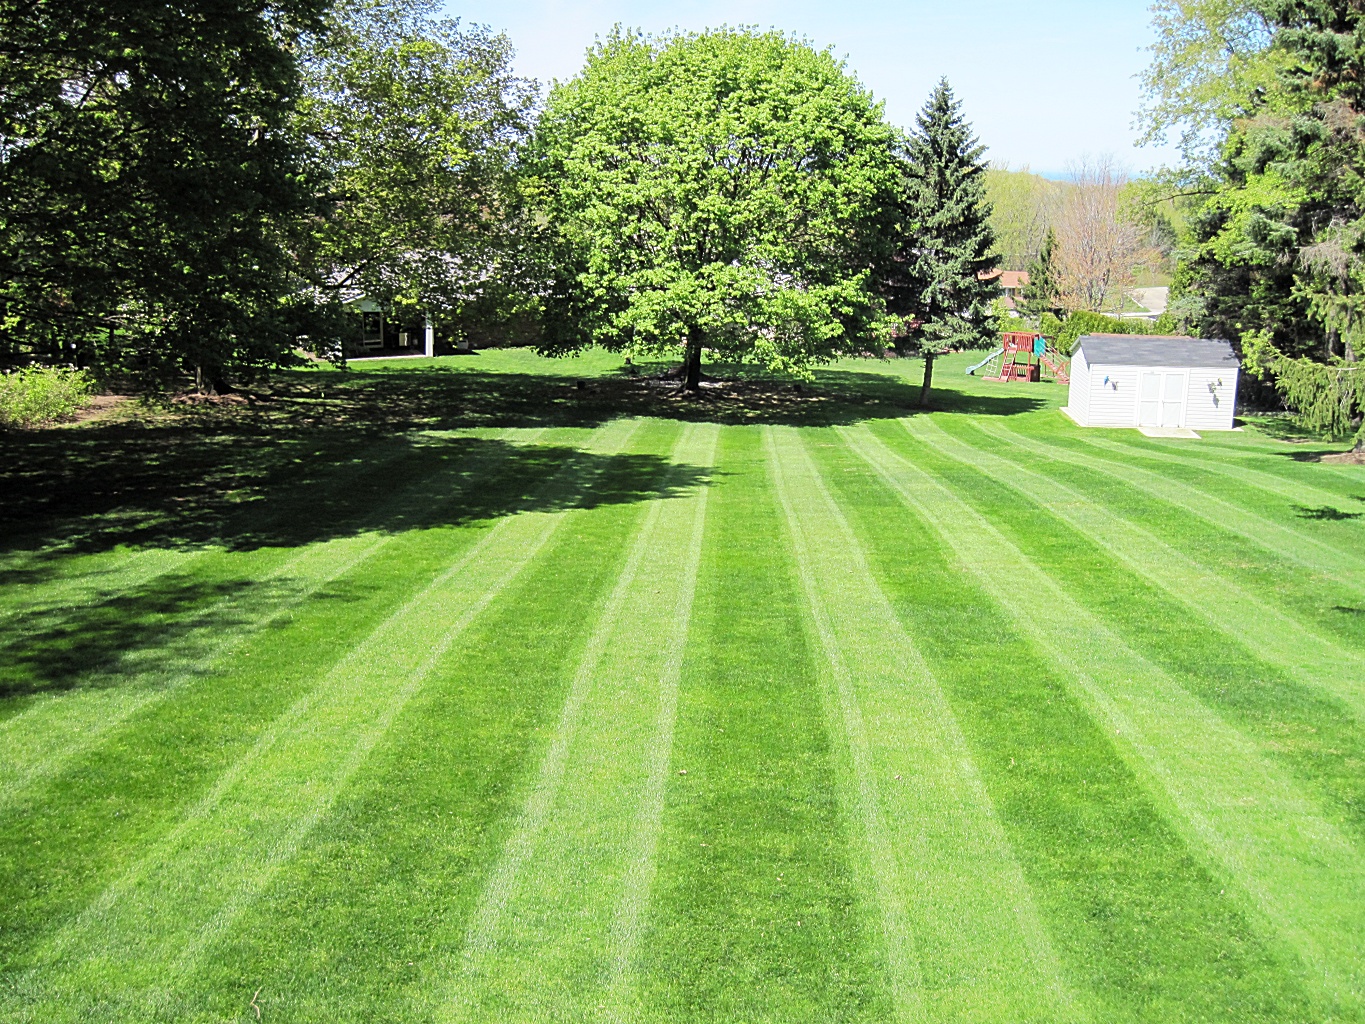 How to Take Care of a Lawn